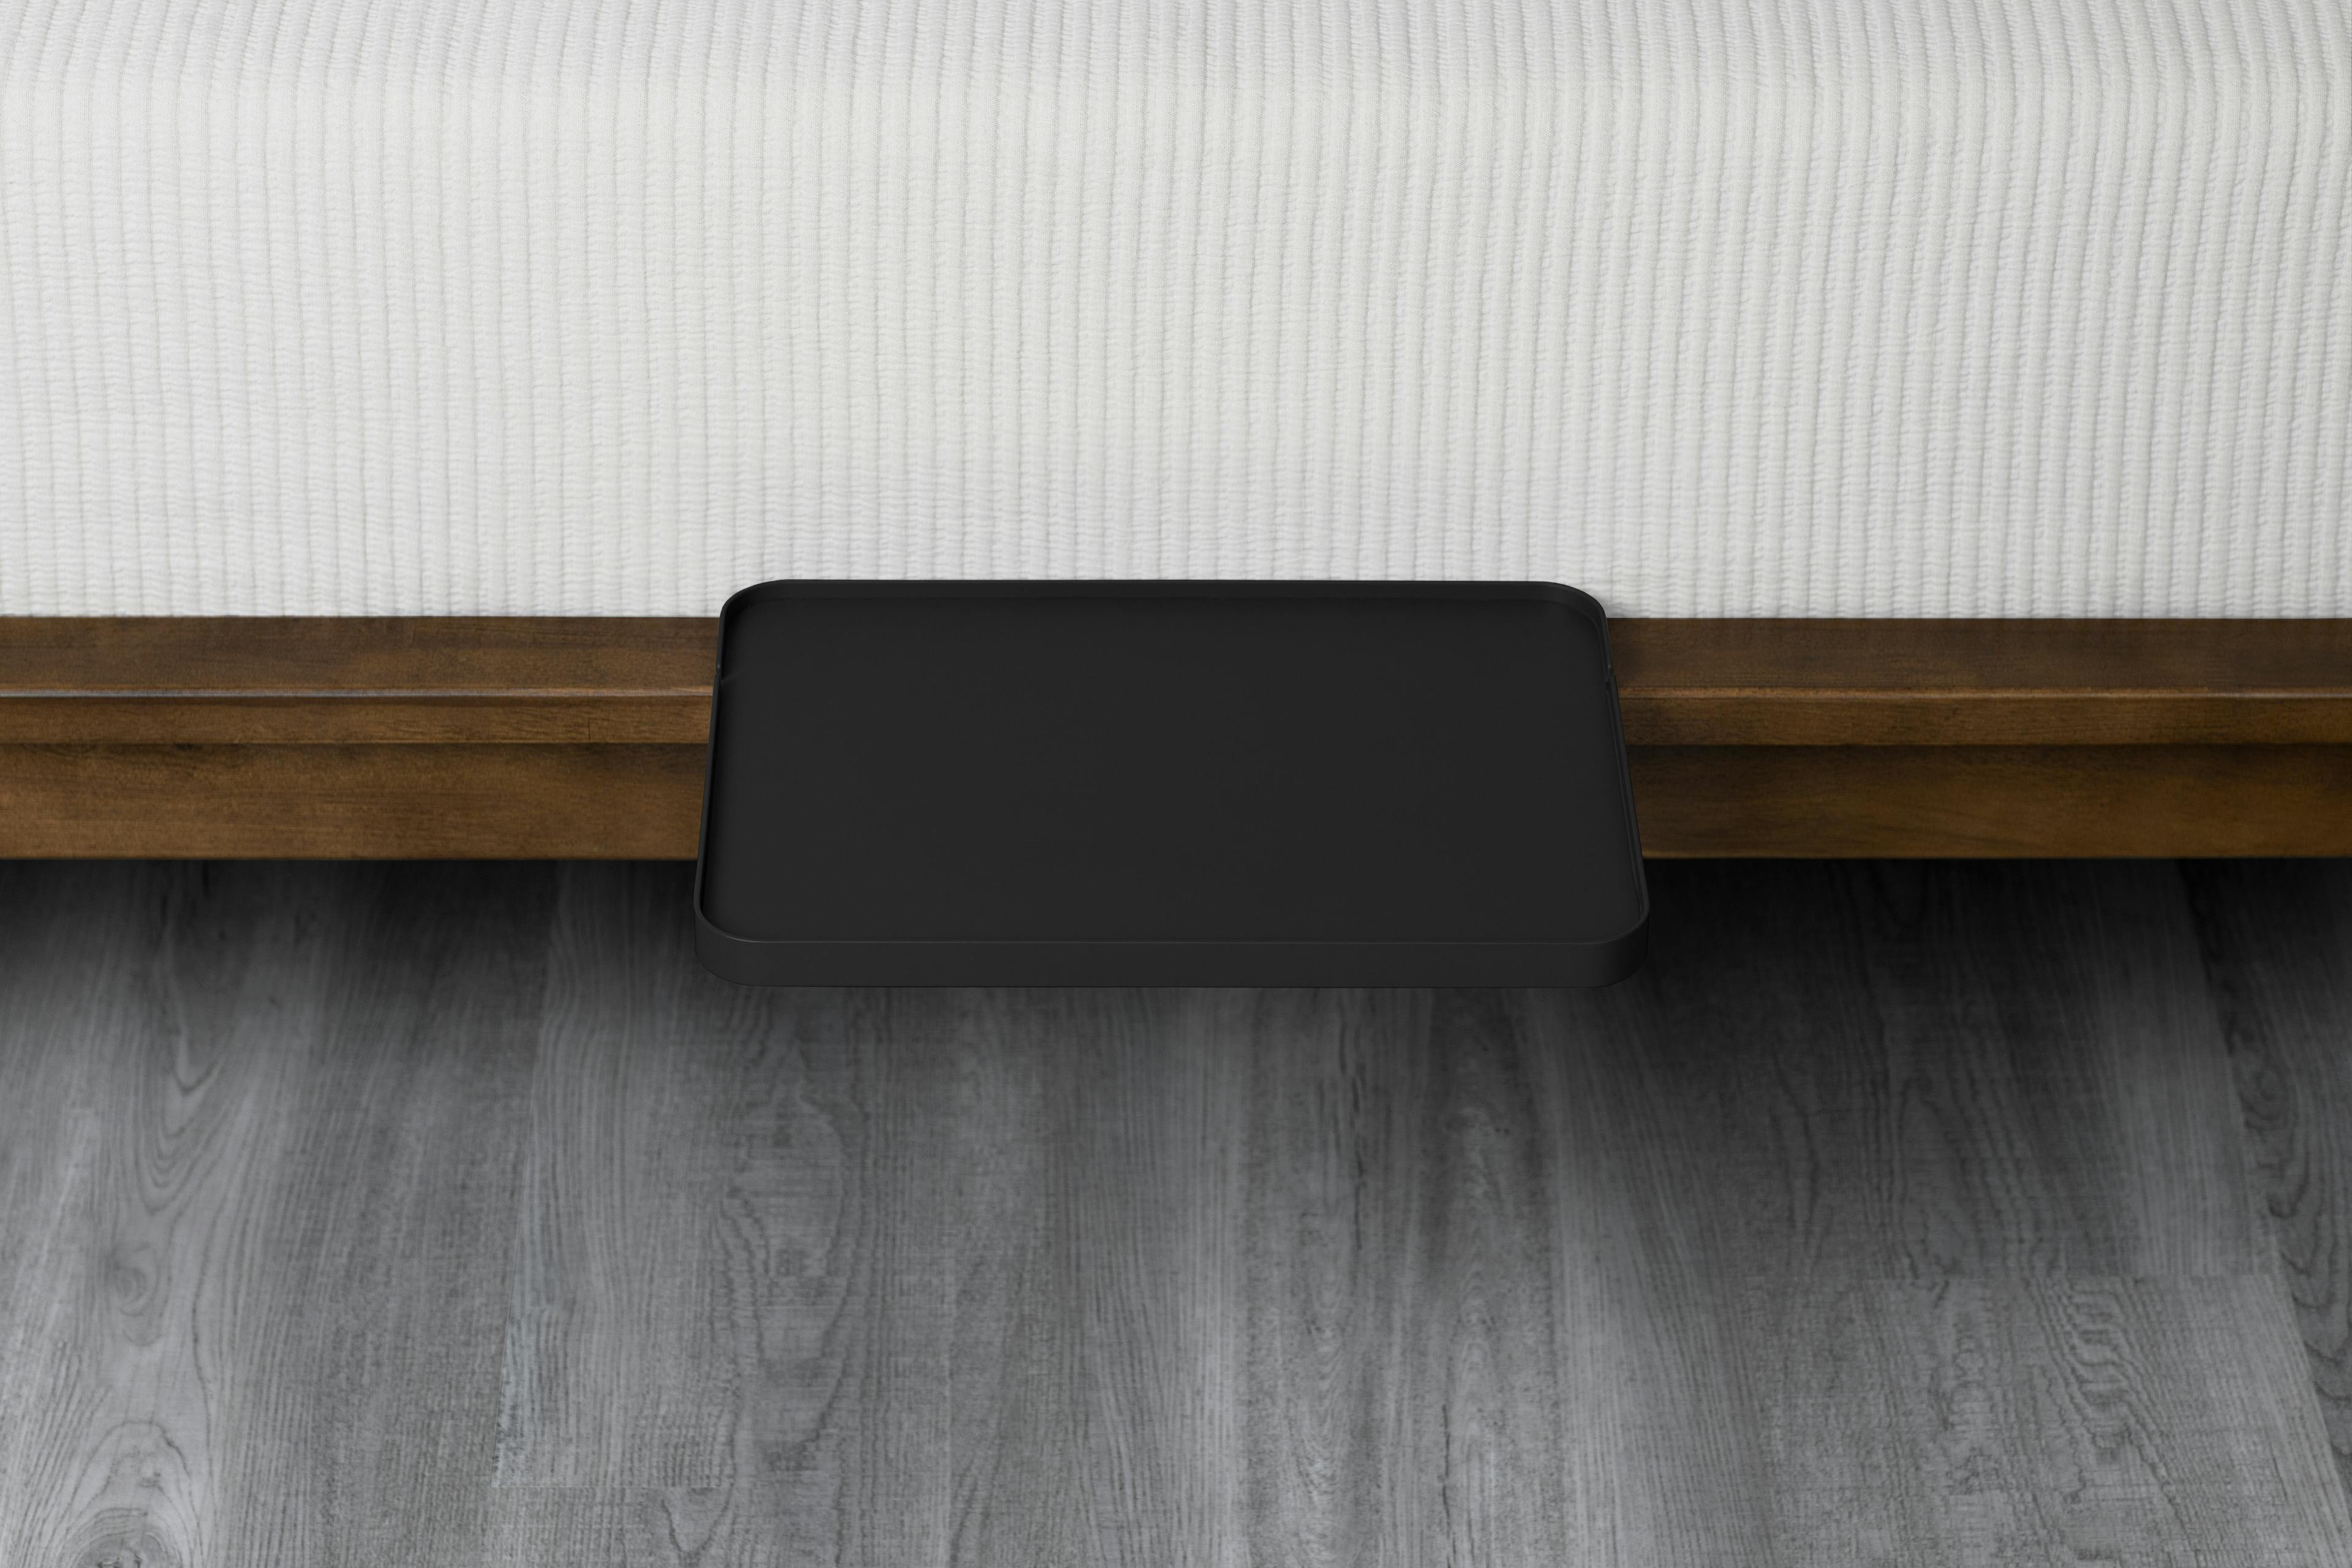 The Tray (Matte Black) - Tray + Bed - 3:2